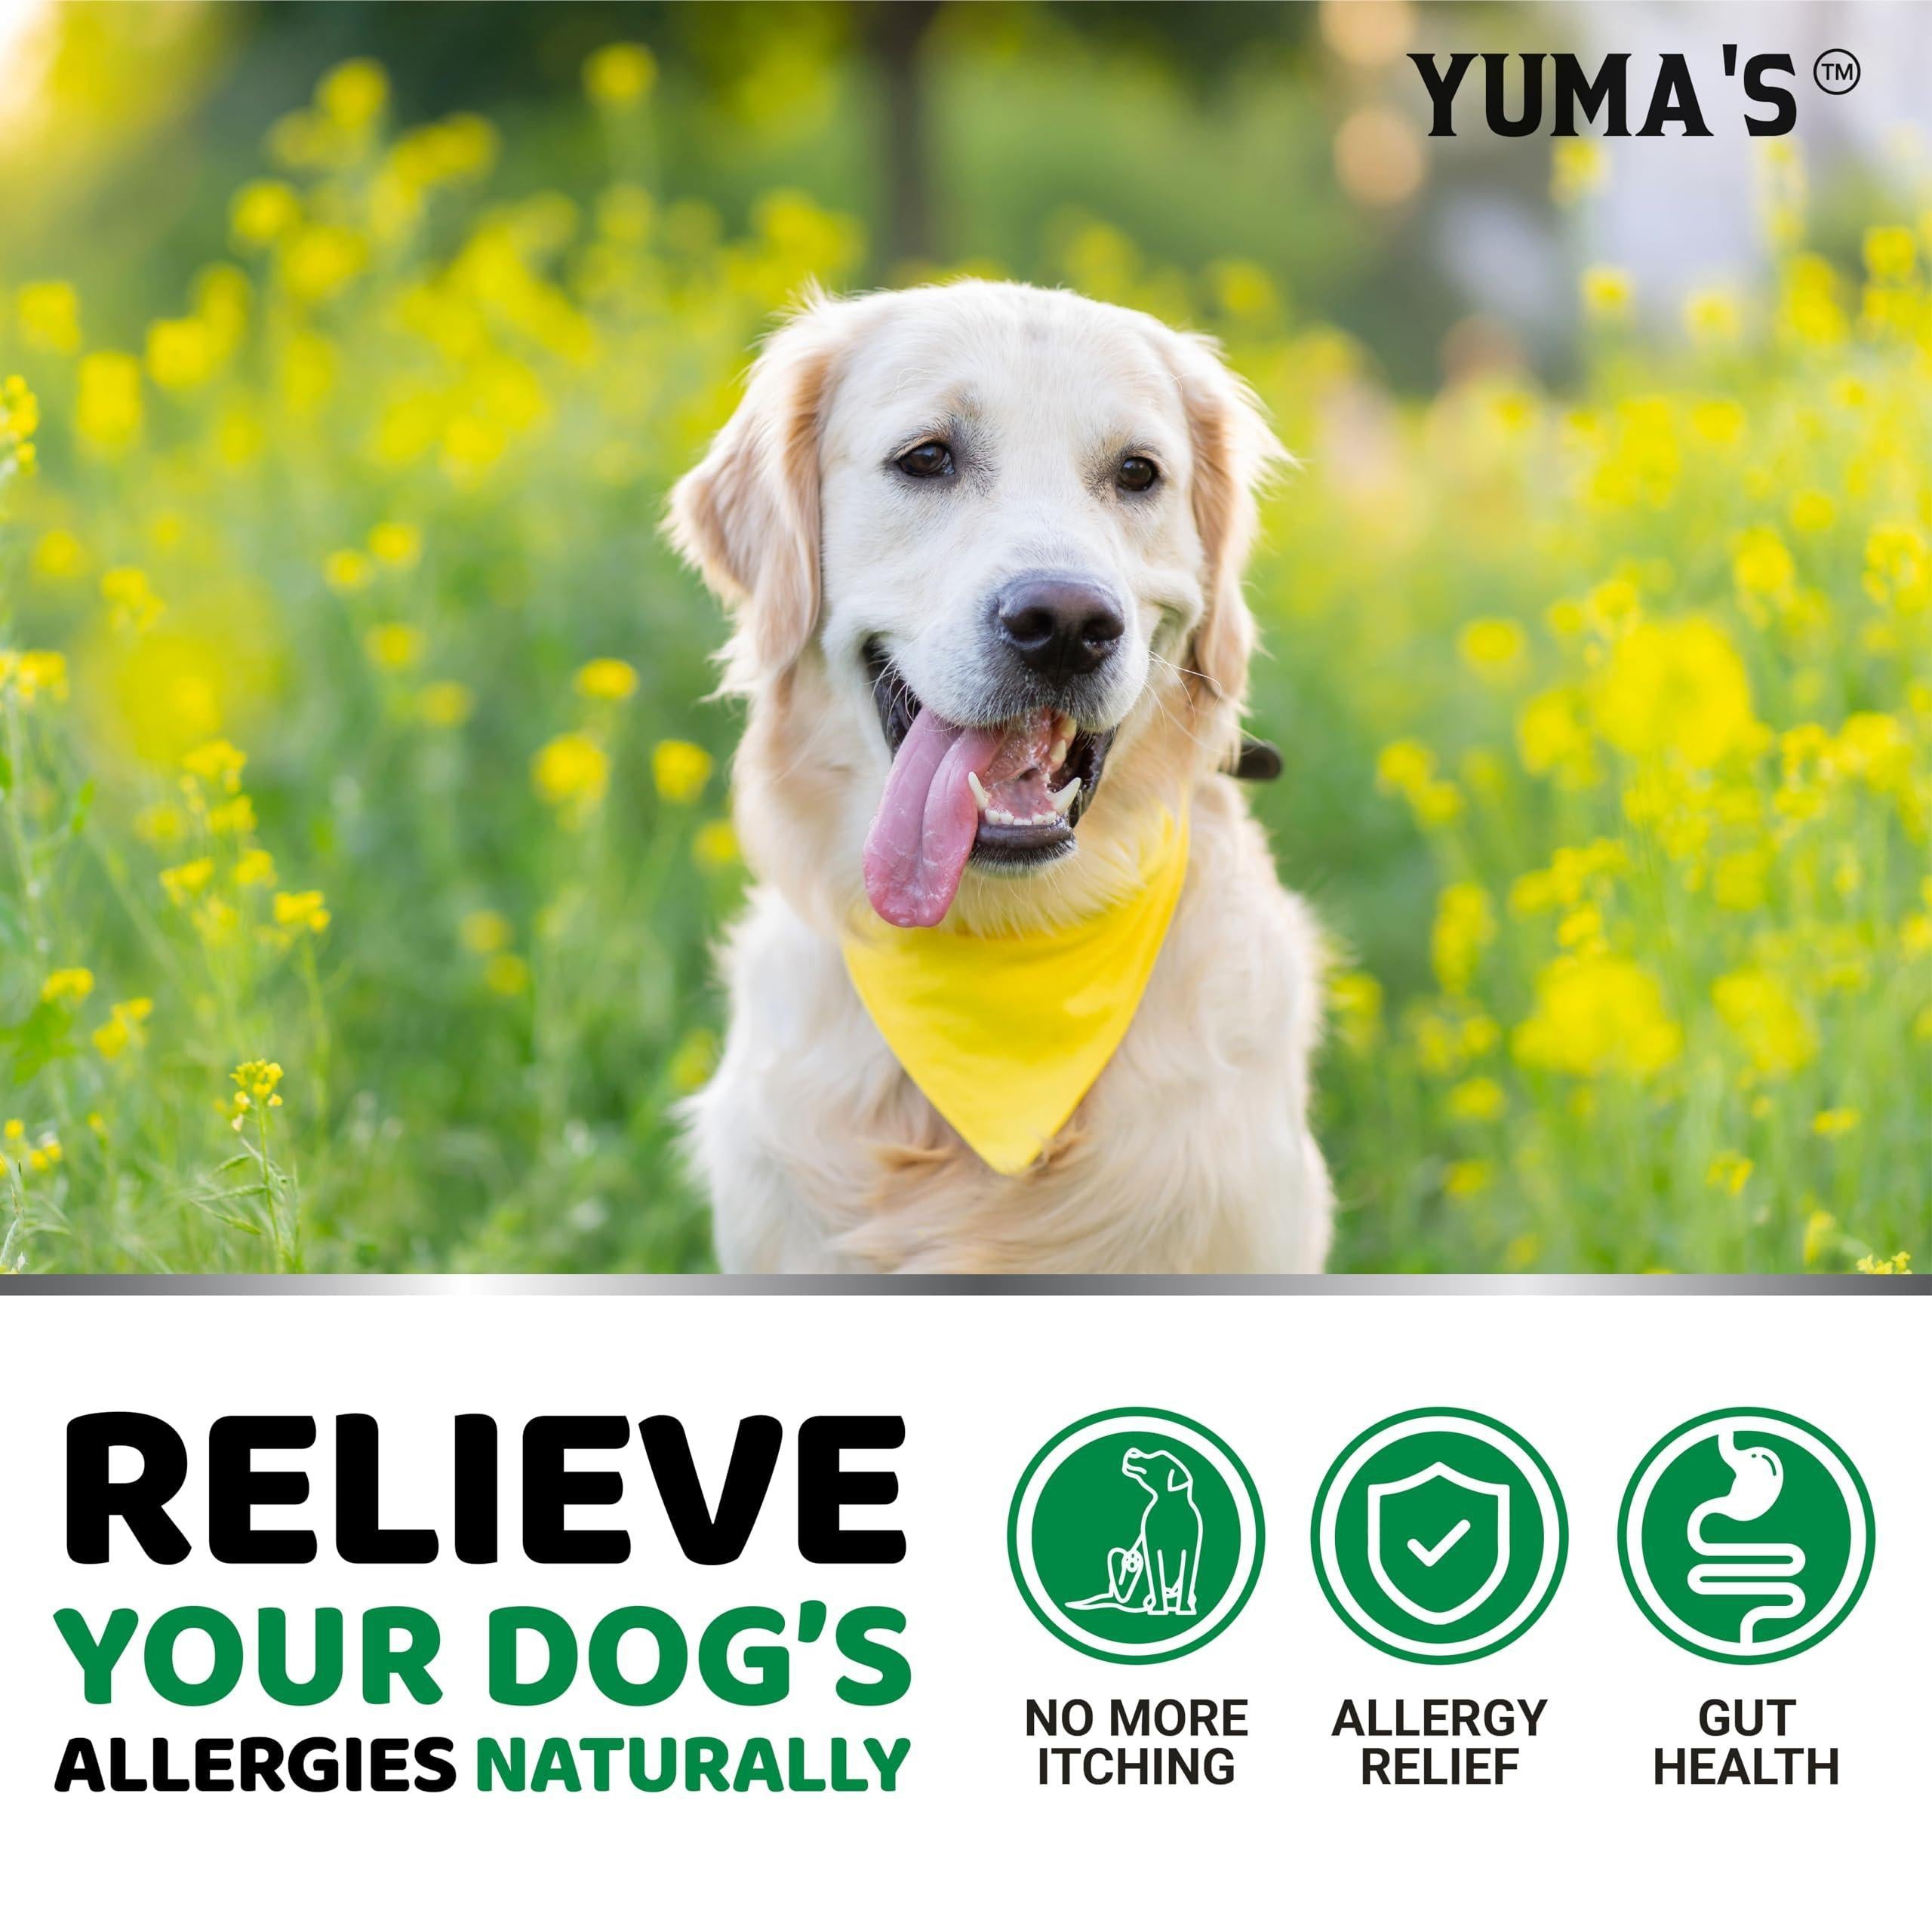 YUMA'S Dog Allergy Relief Chews   Dog Itching Skin Relief Treatment Pills   170 Treats   Anti Itch for Dogs   Itchy and Paw Licking   Dry Skin & Hot Spots   Omega 3 Fish Oil   Skin & Coat Supplement